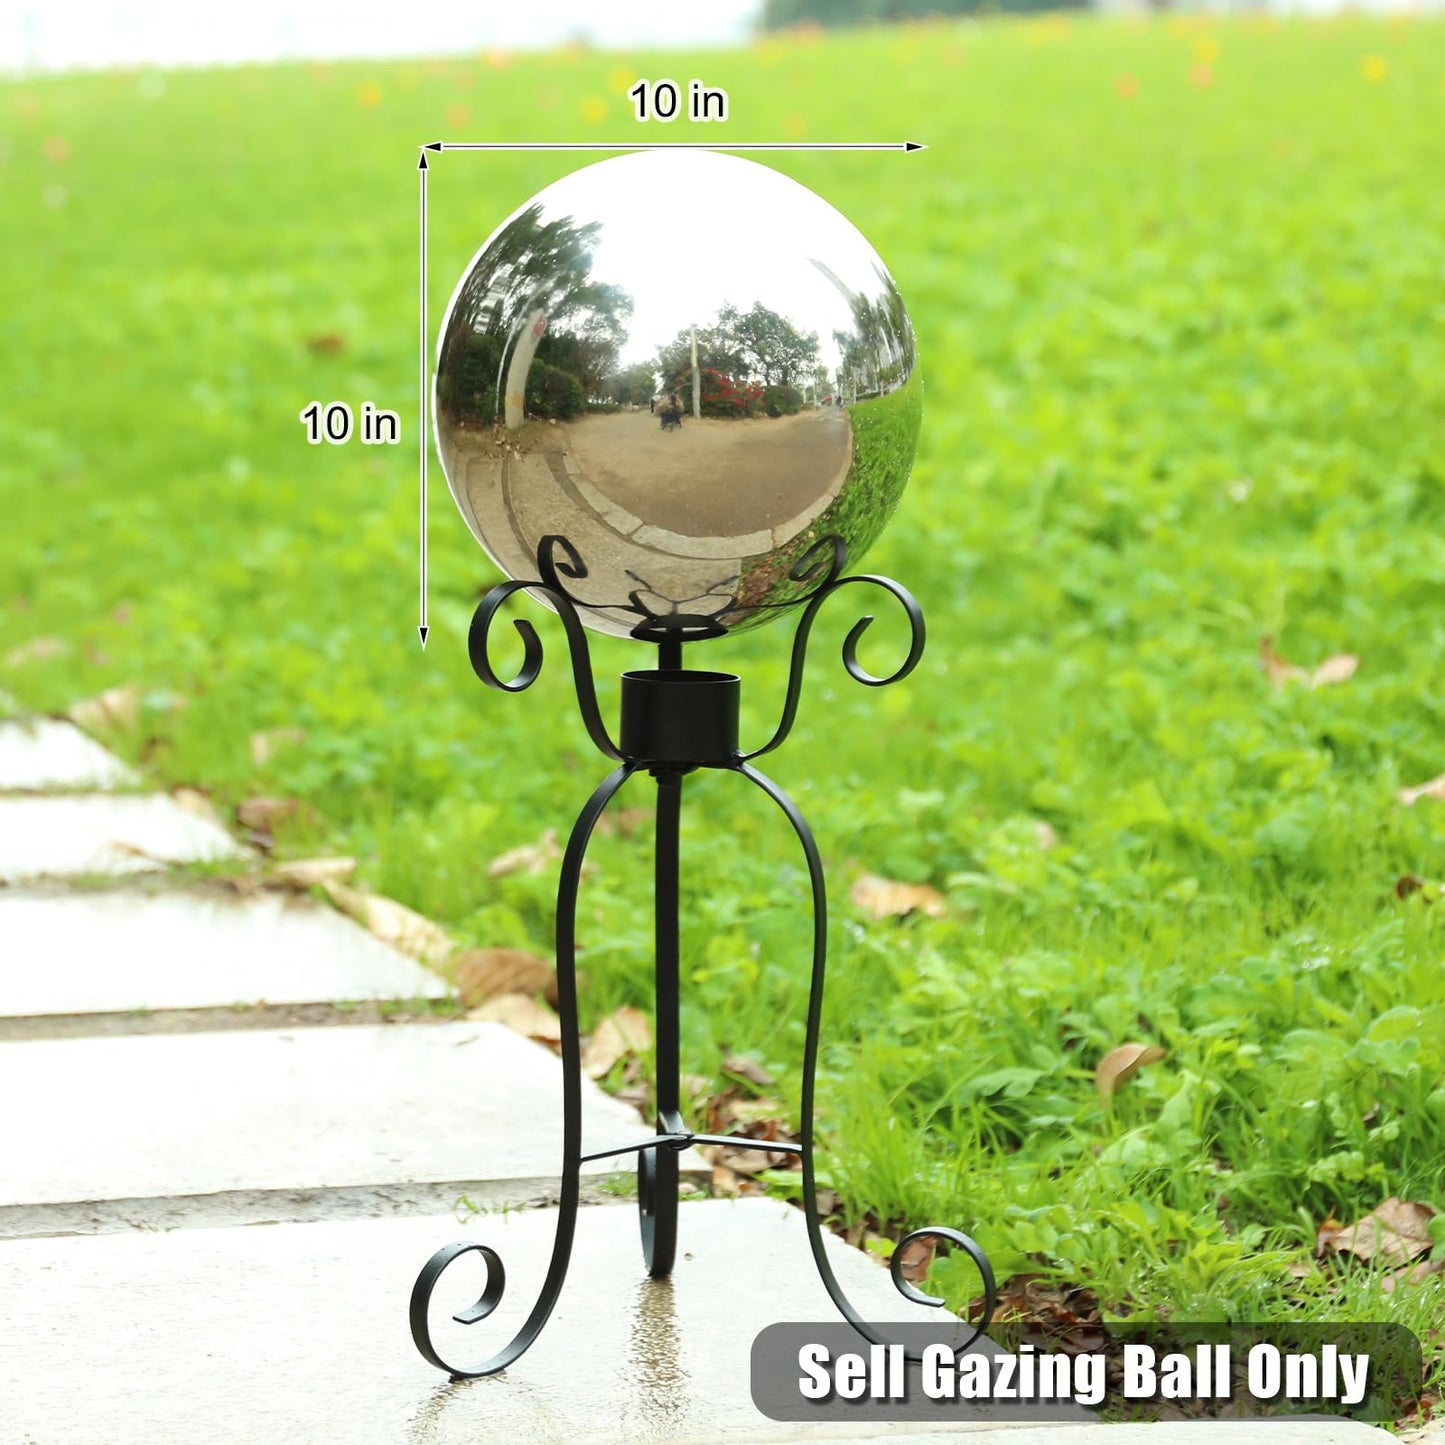 VCUTEKA Gazing Ball, 10" Stainless Steel Mirror Ball Reflective Garden Sphere, Gazing Globe for Home Garden Patio Lawn Outdoor and Indoor Decorative, Silver